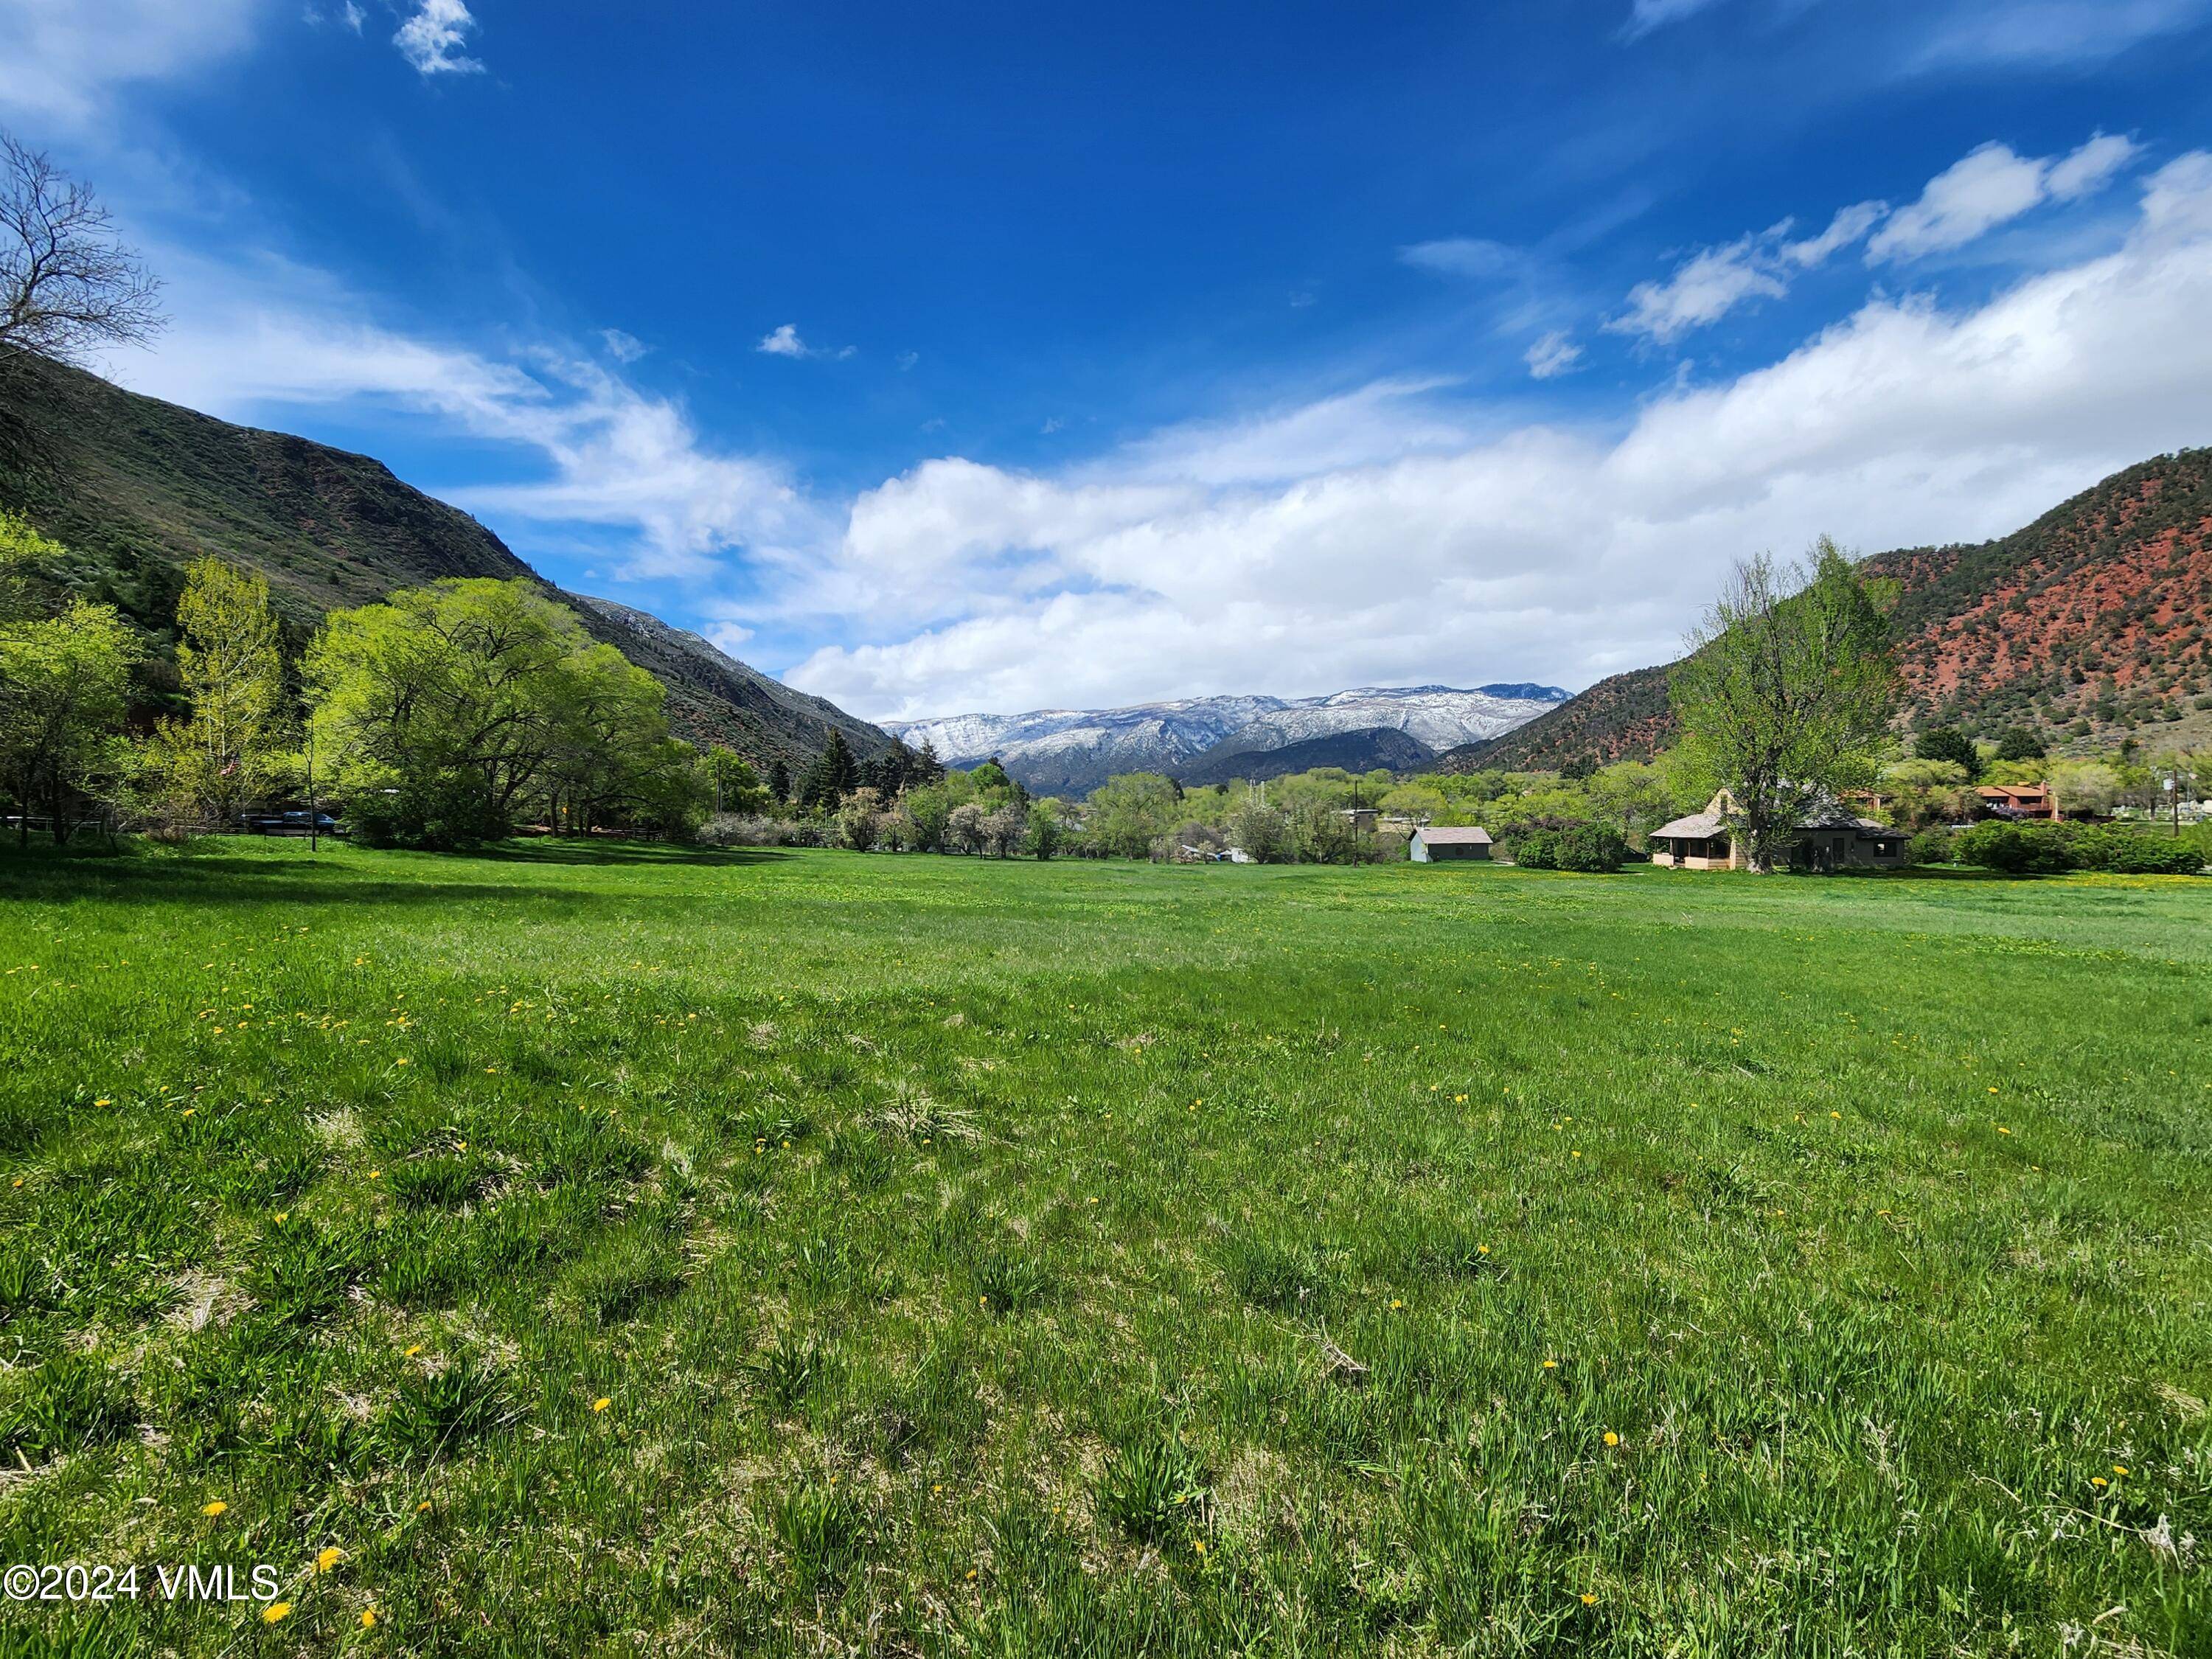 Premier and final property in the Roaring Fork Valley with extensive river frontage and true subdivision potential in the county.